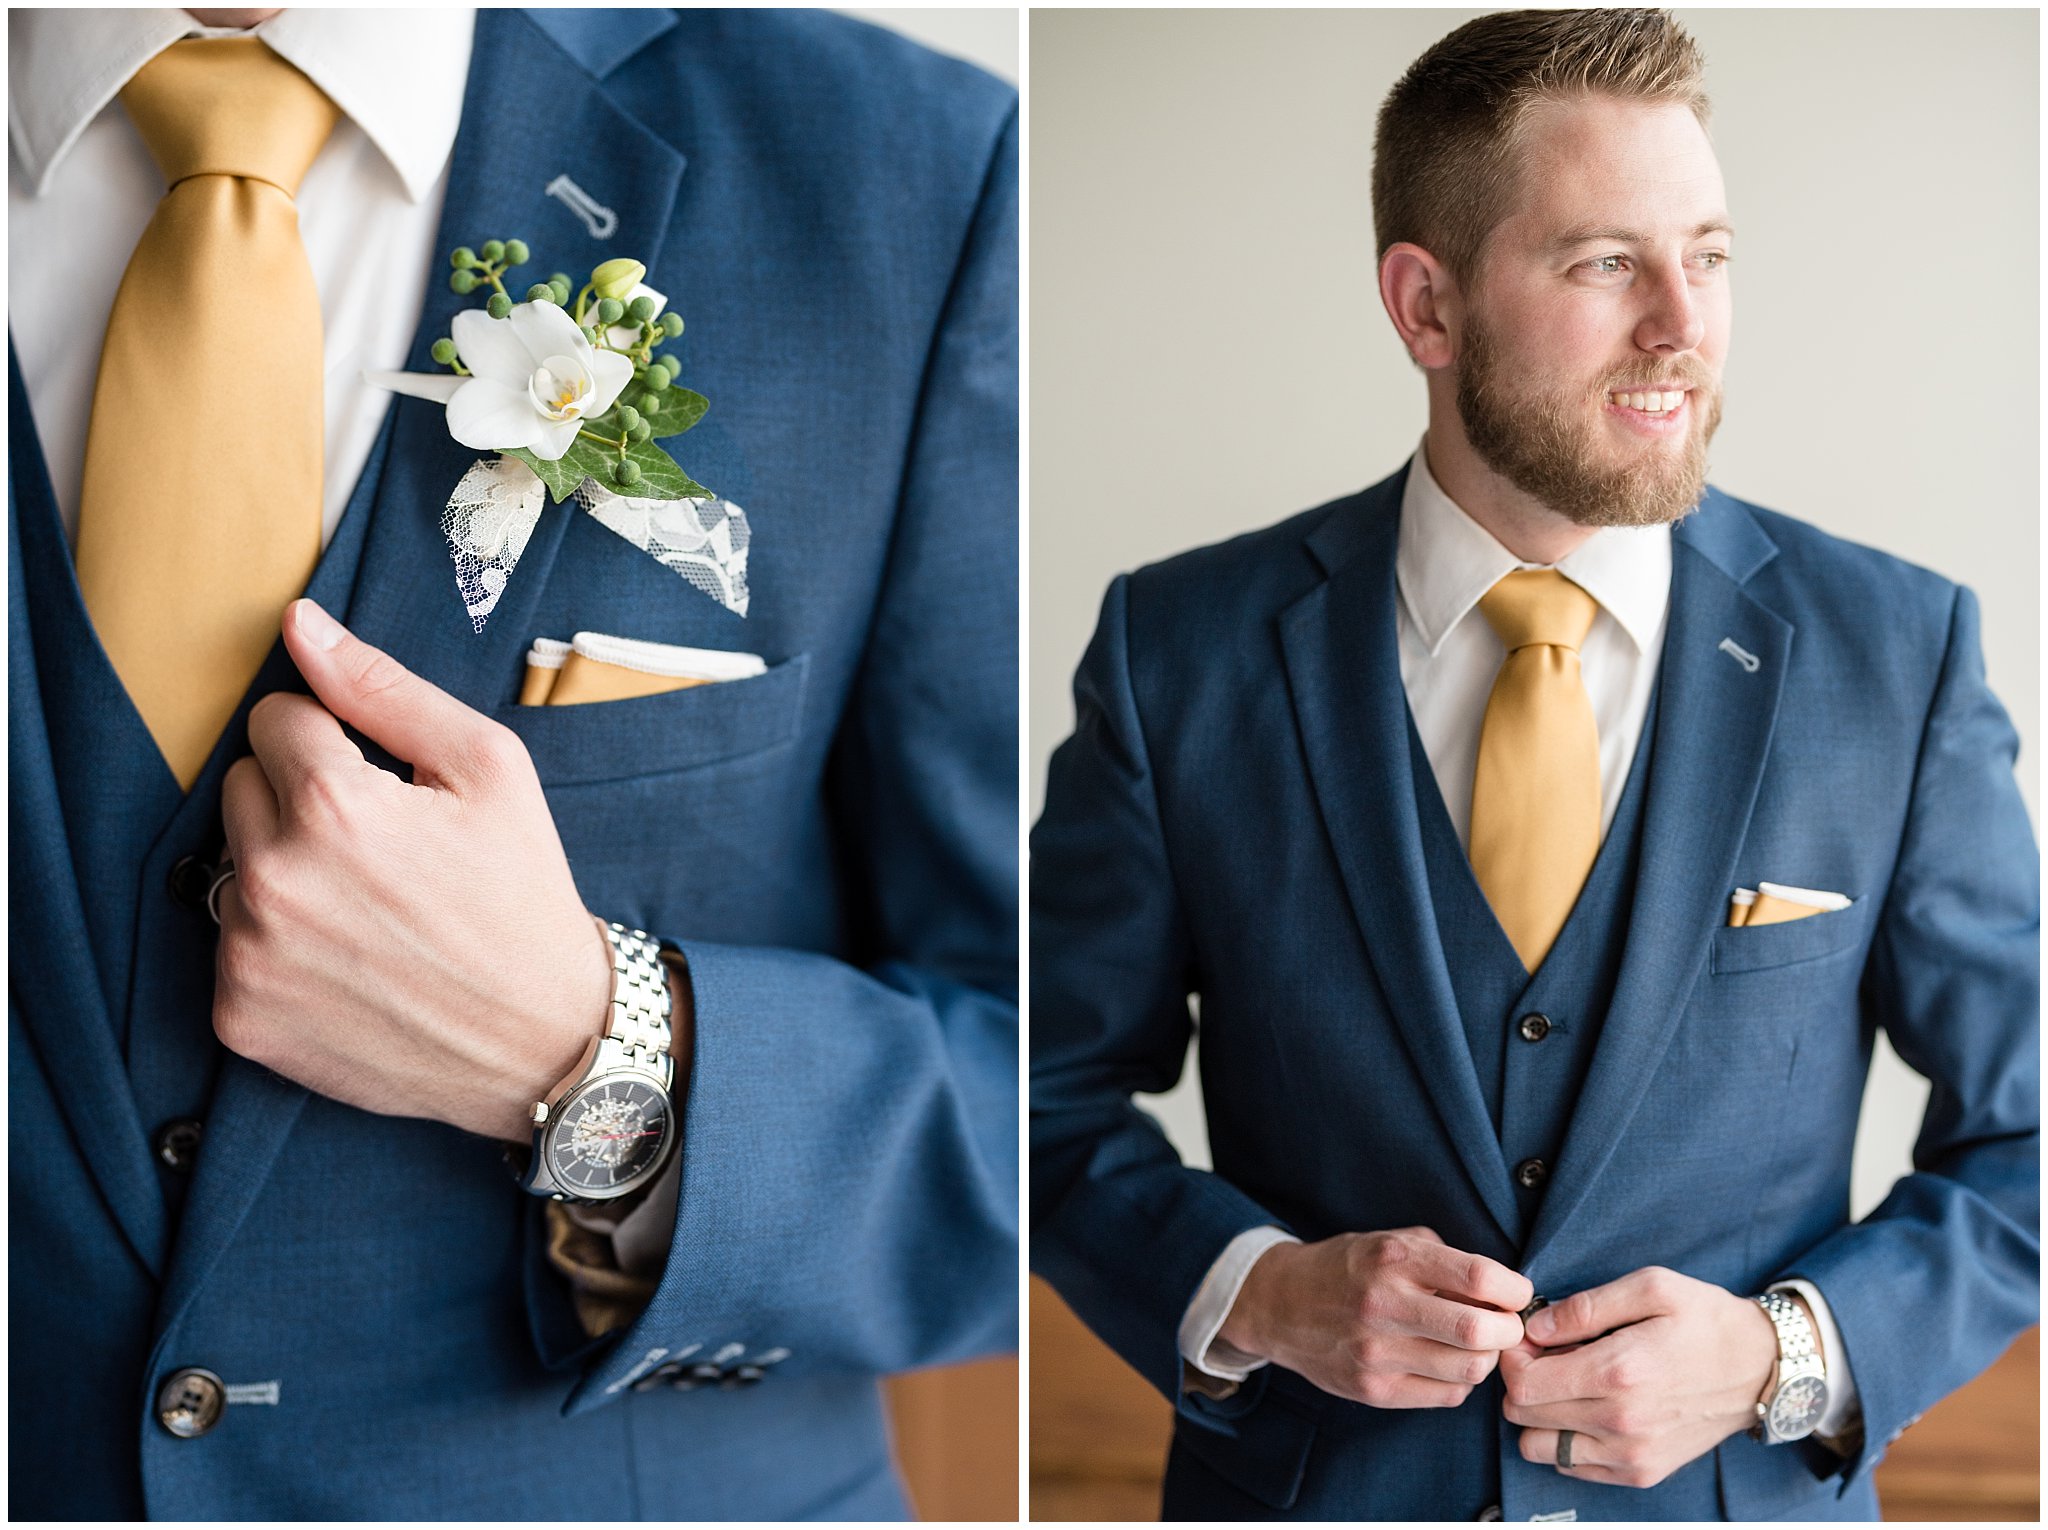 Groom before the wedding | Navy and gold suit with vest | detail shot of boutonniere | Talia Event Center